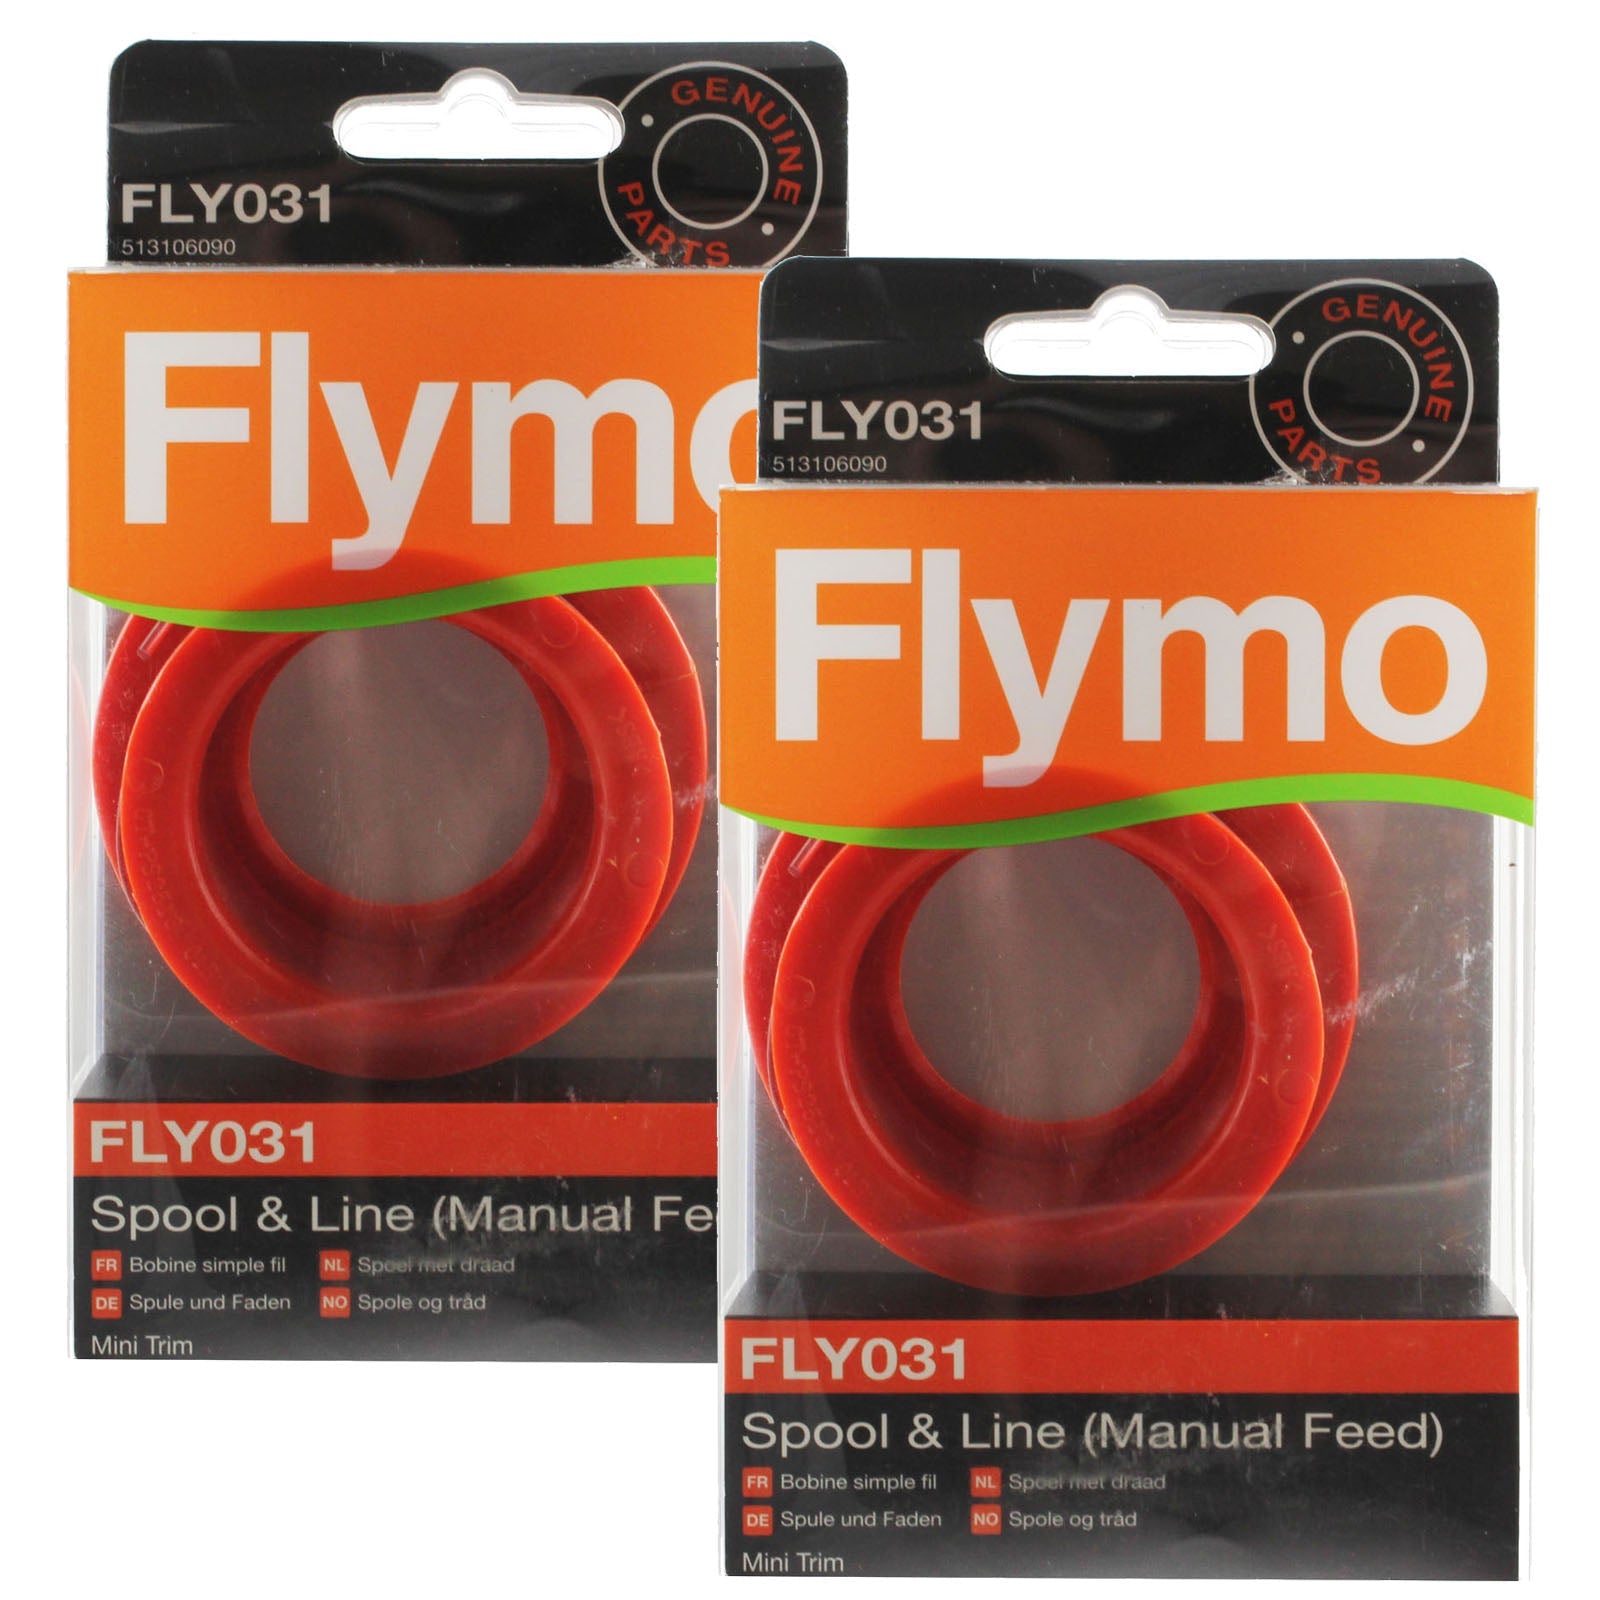 Flymo Strimmer Trimmer Mini Trim ET21 MT21 Spool and Line FLY031 x 2